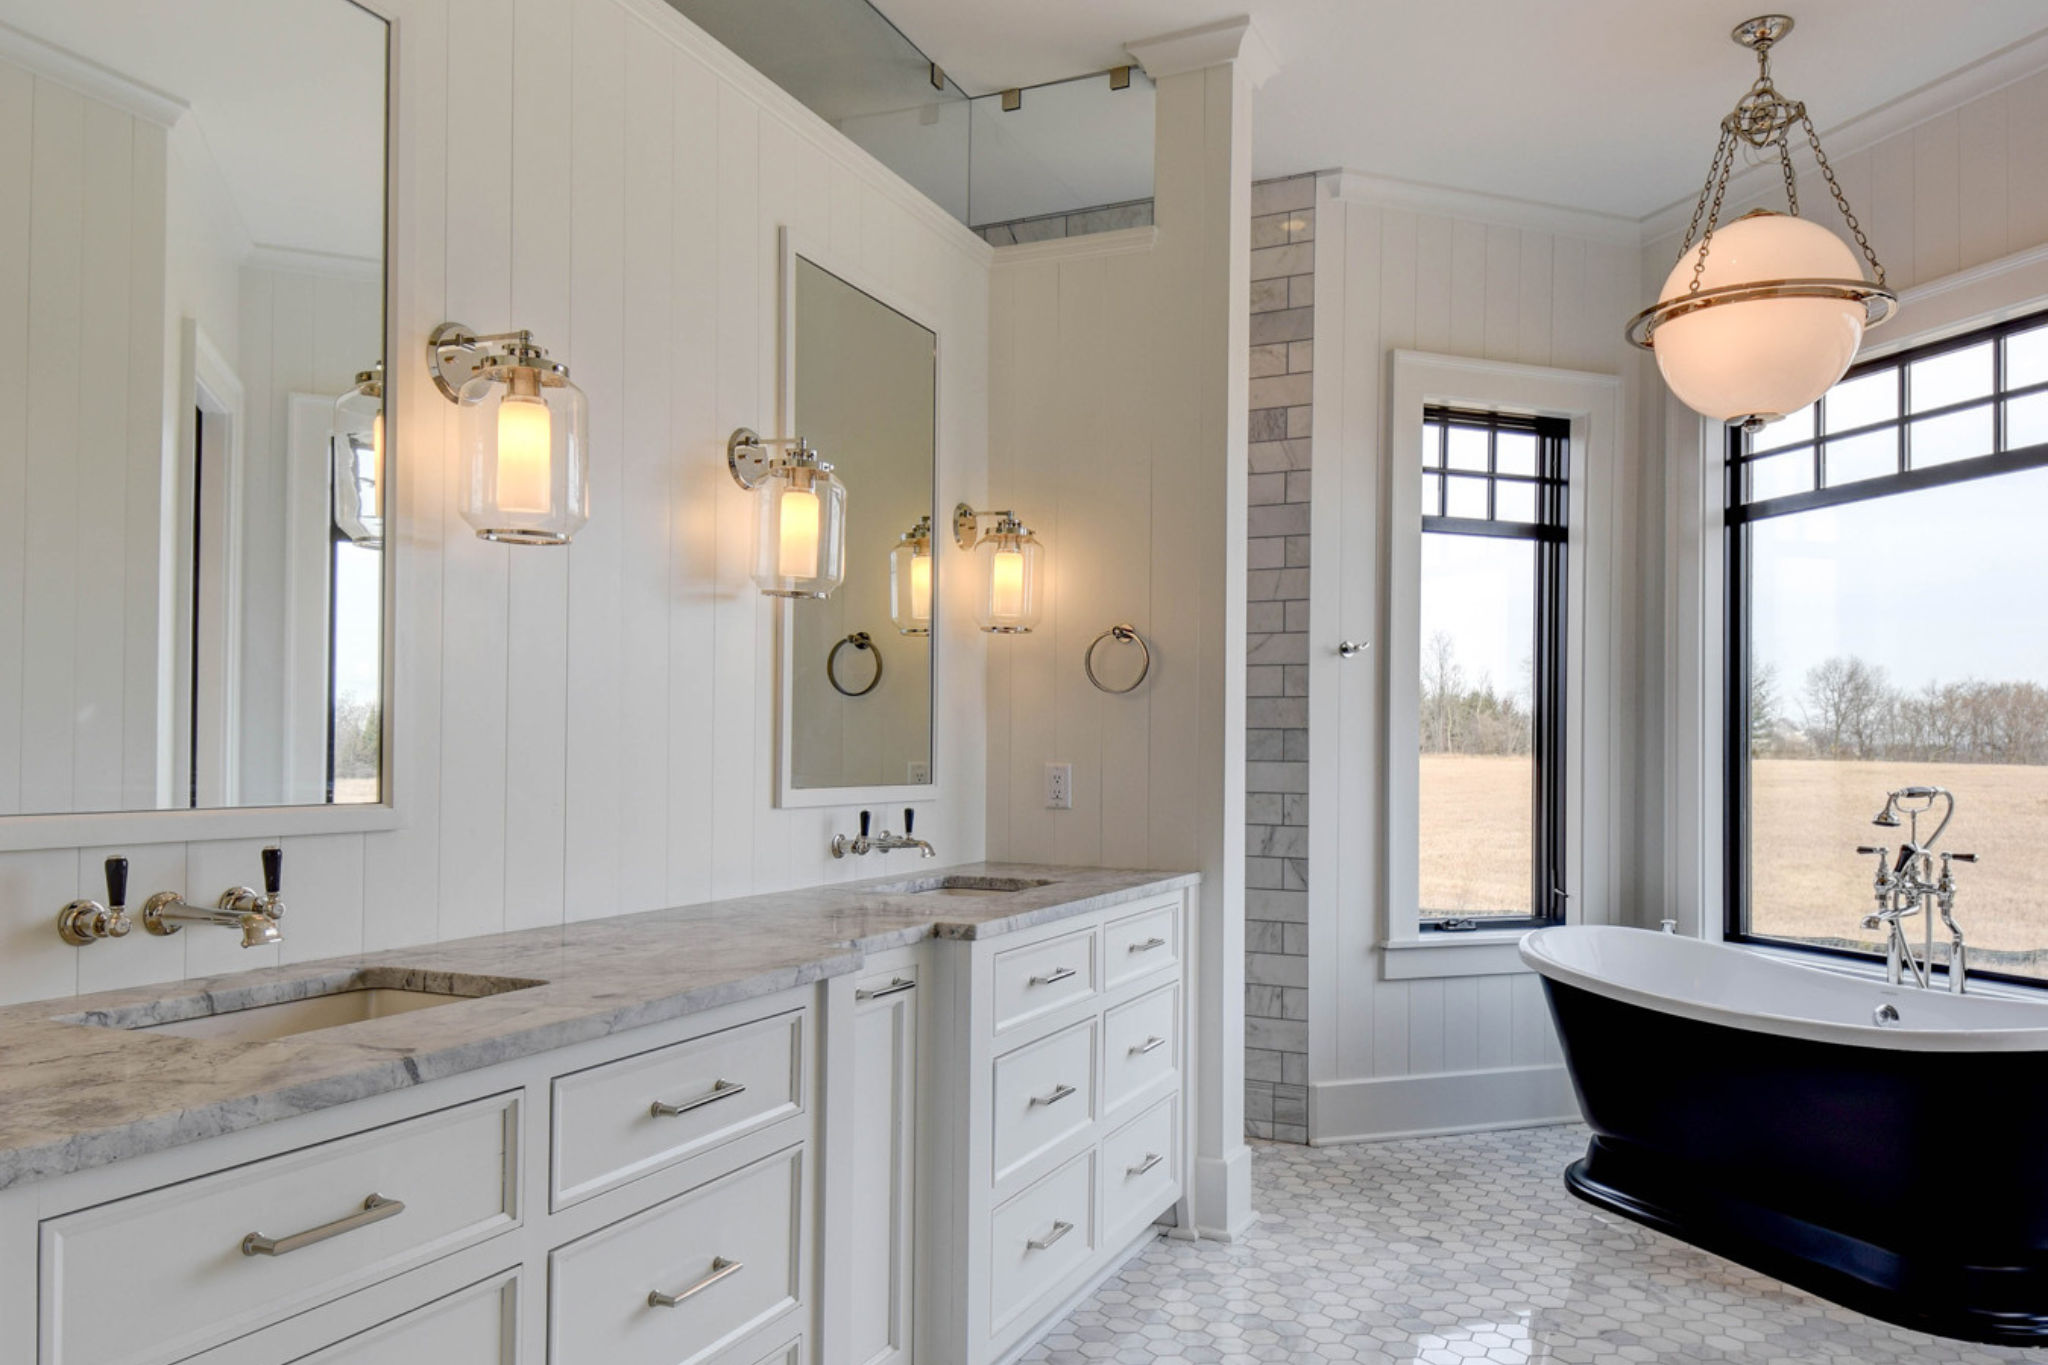 Elegant bathroom with a freestanding tub and dual vanity in a luxury custom home.